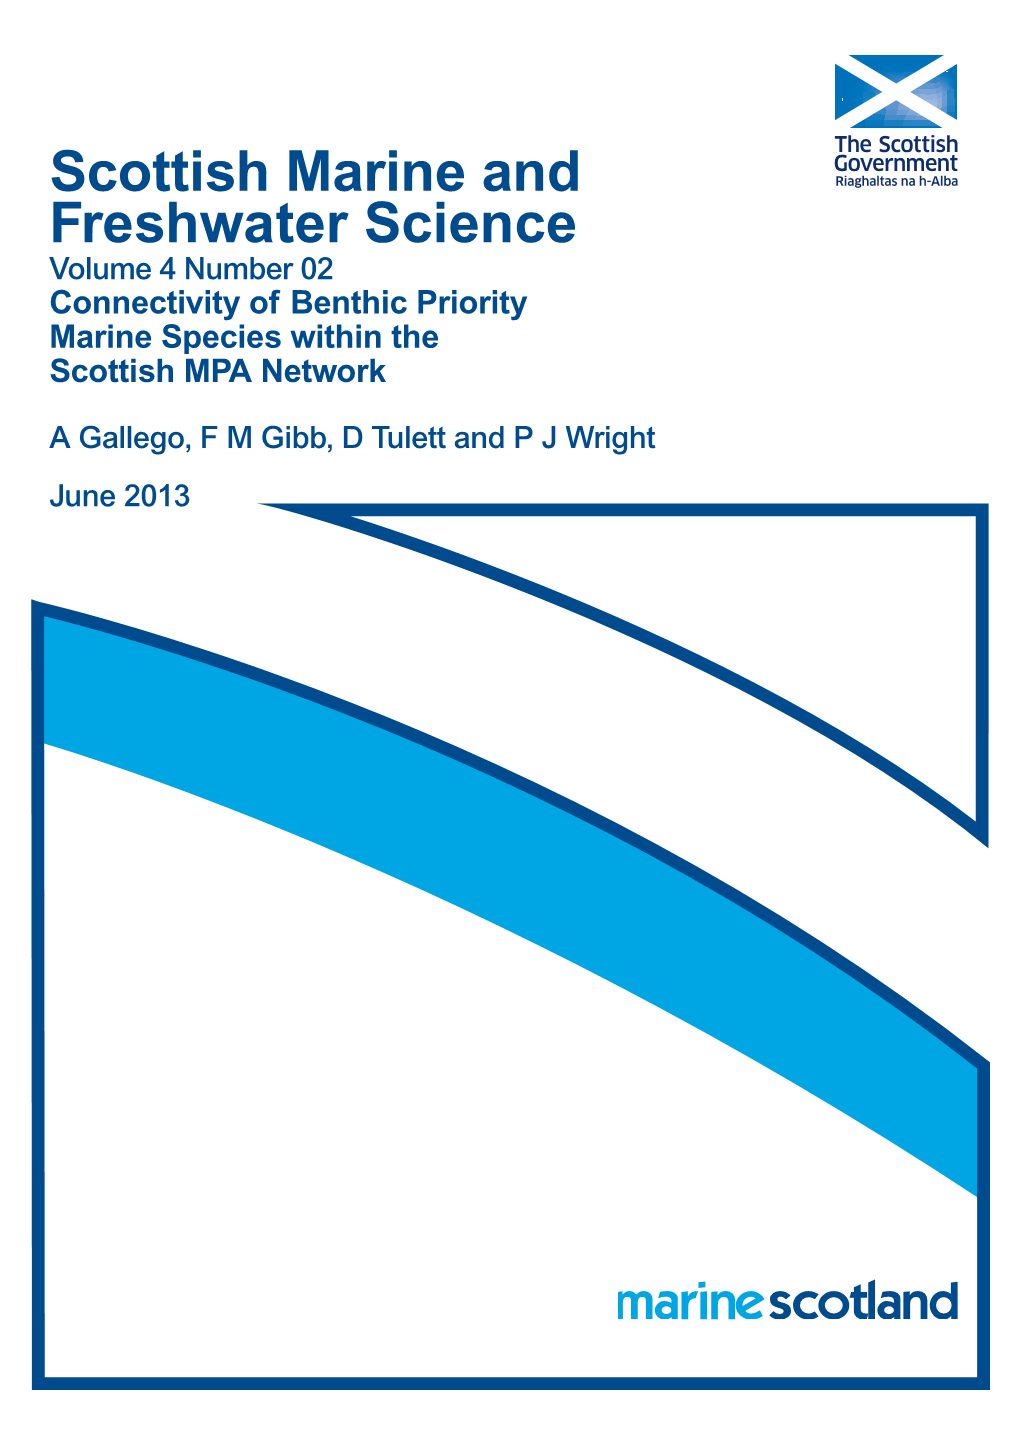 Scottish Marine and Freshwater Science Volume 4 Number 02 Connectivity of Benthic Priority Marine Species Within the Scottish MPA Network